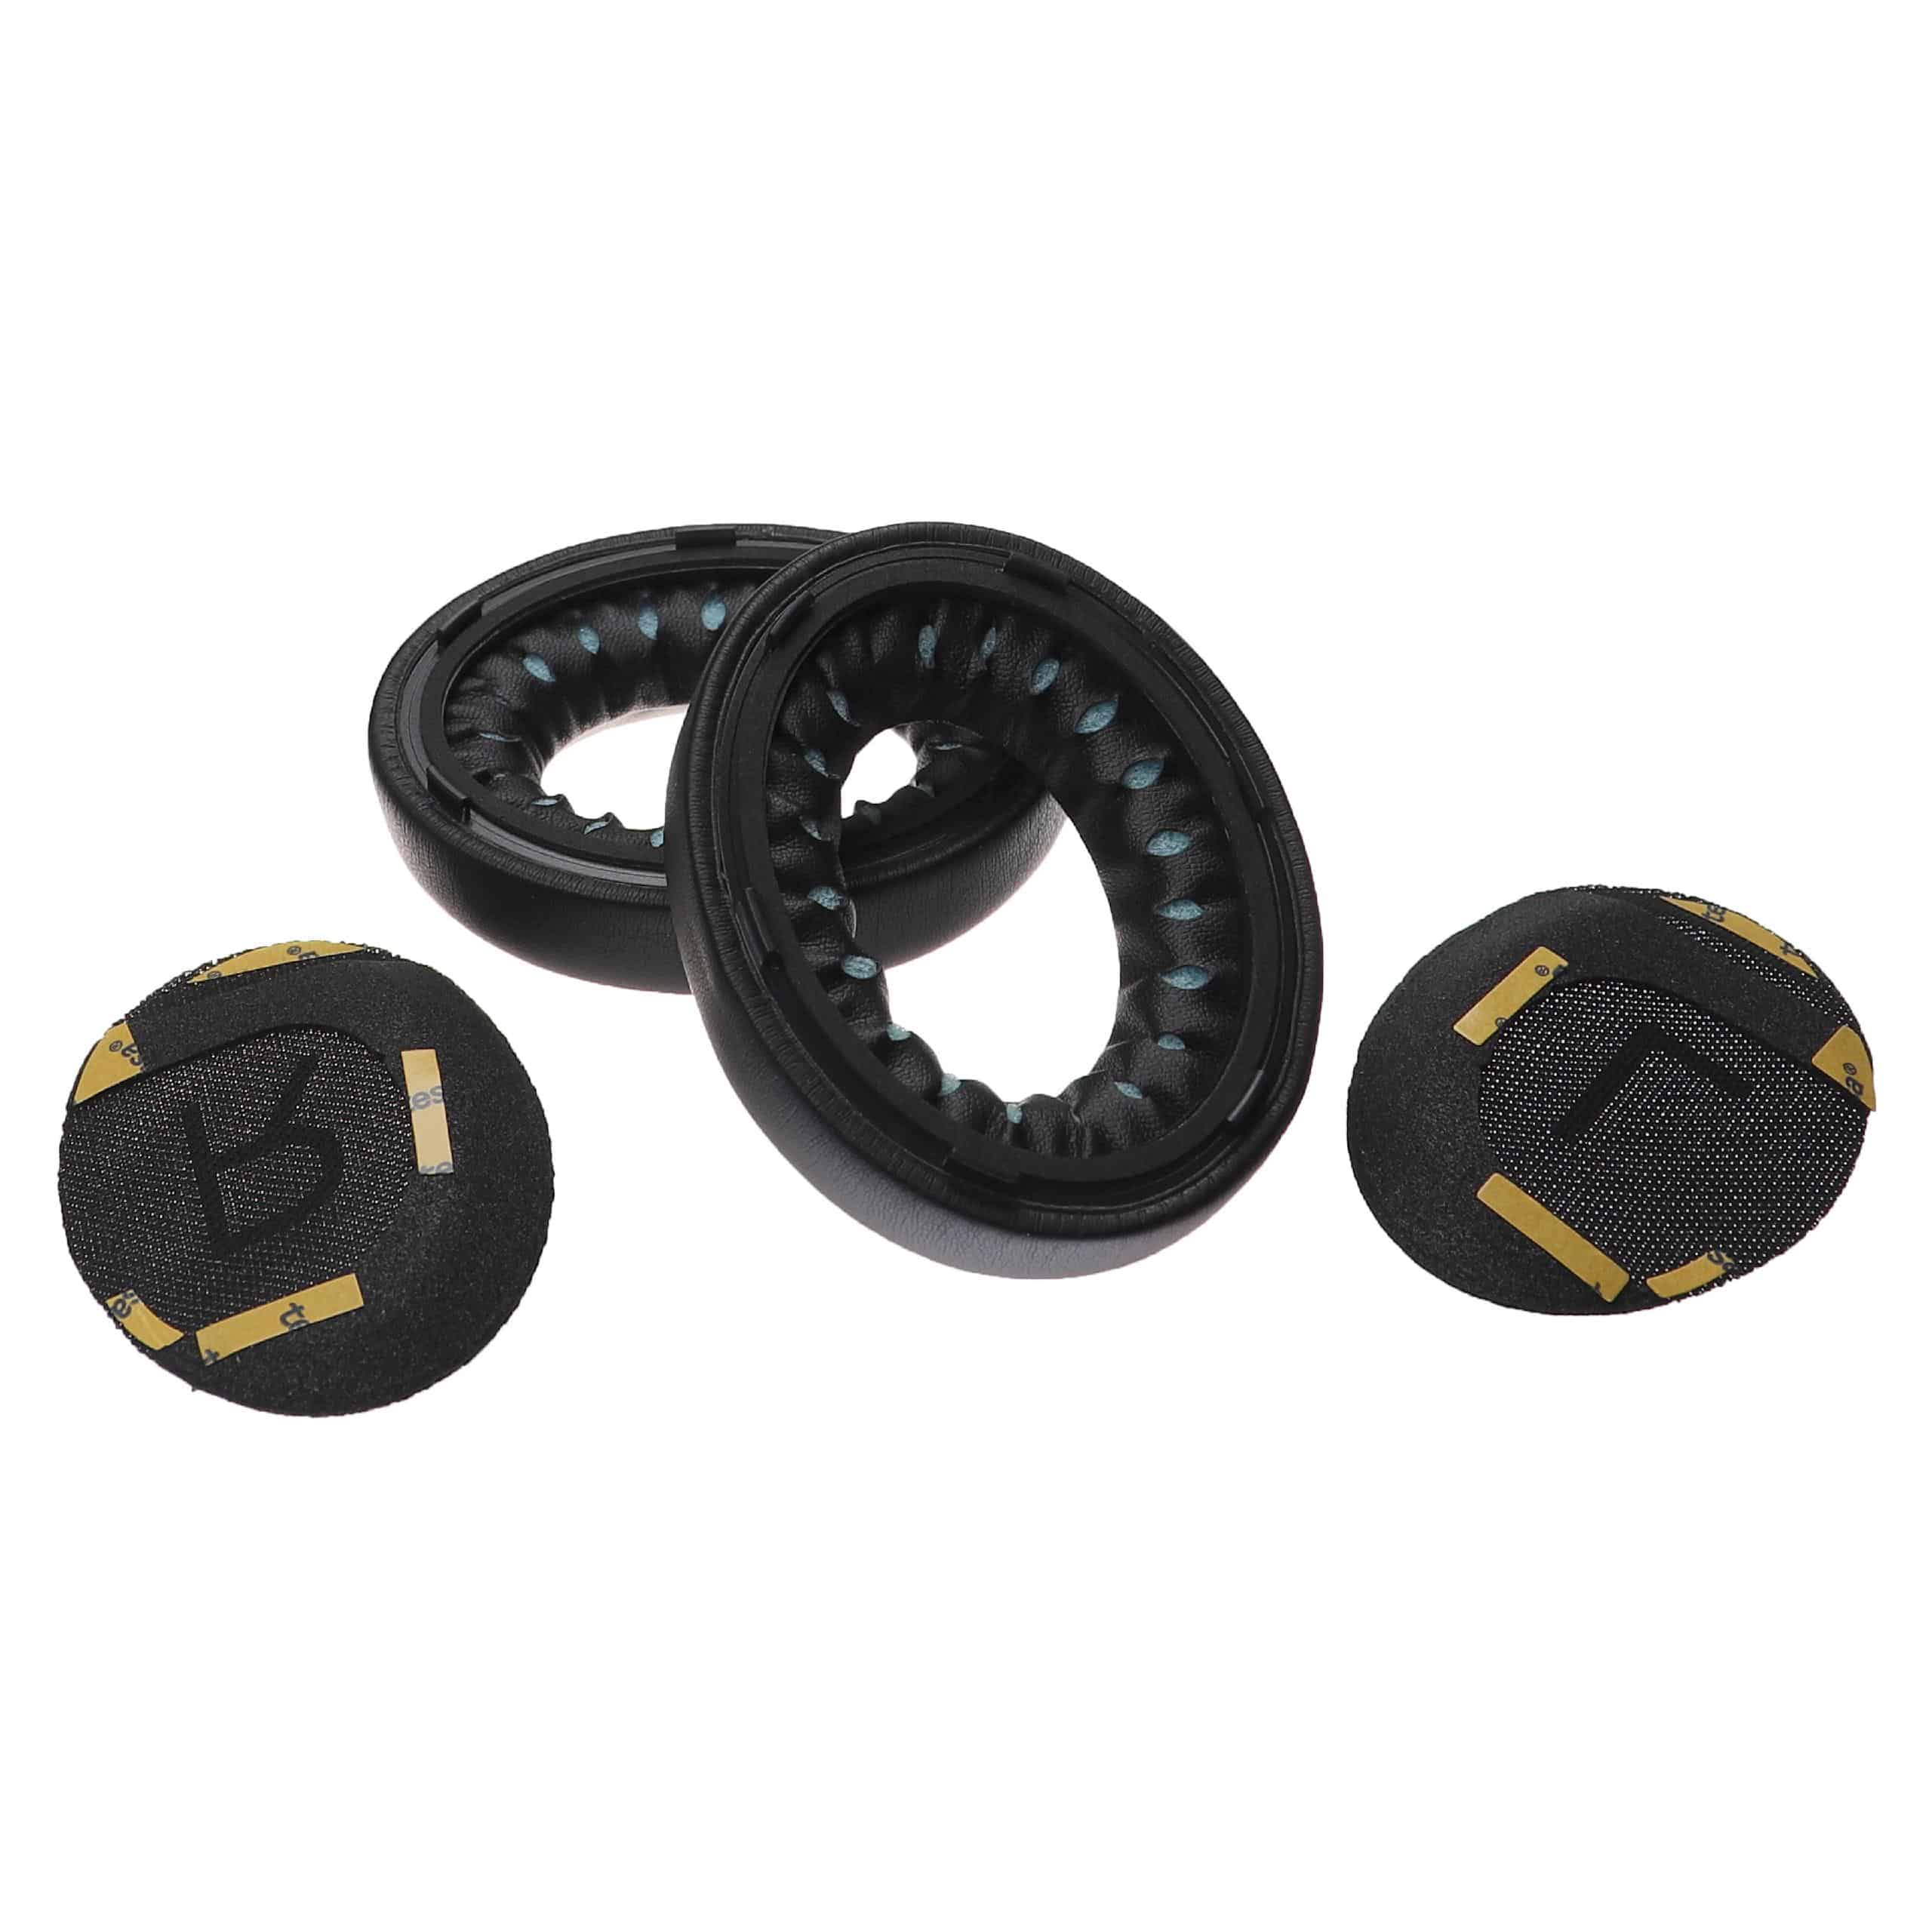 Ear Pads suitable for Bose NC 700 Headphones etc. - with Memory Foam, Soft Material, 23 mm thick